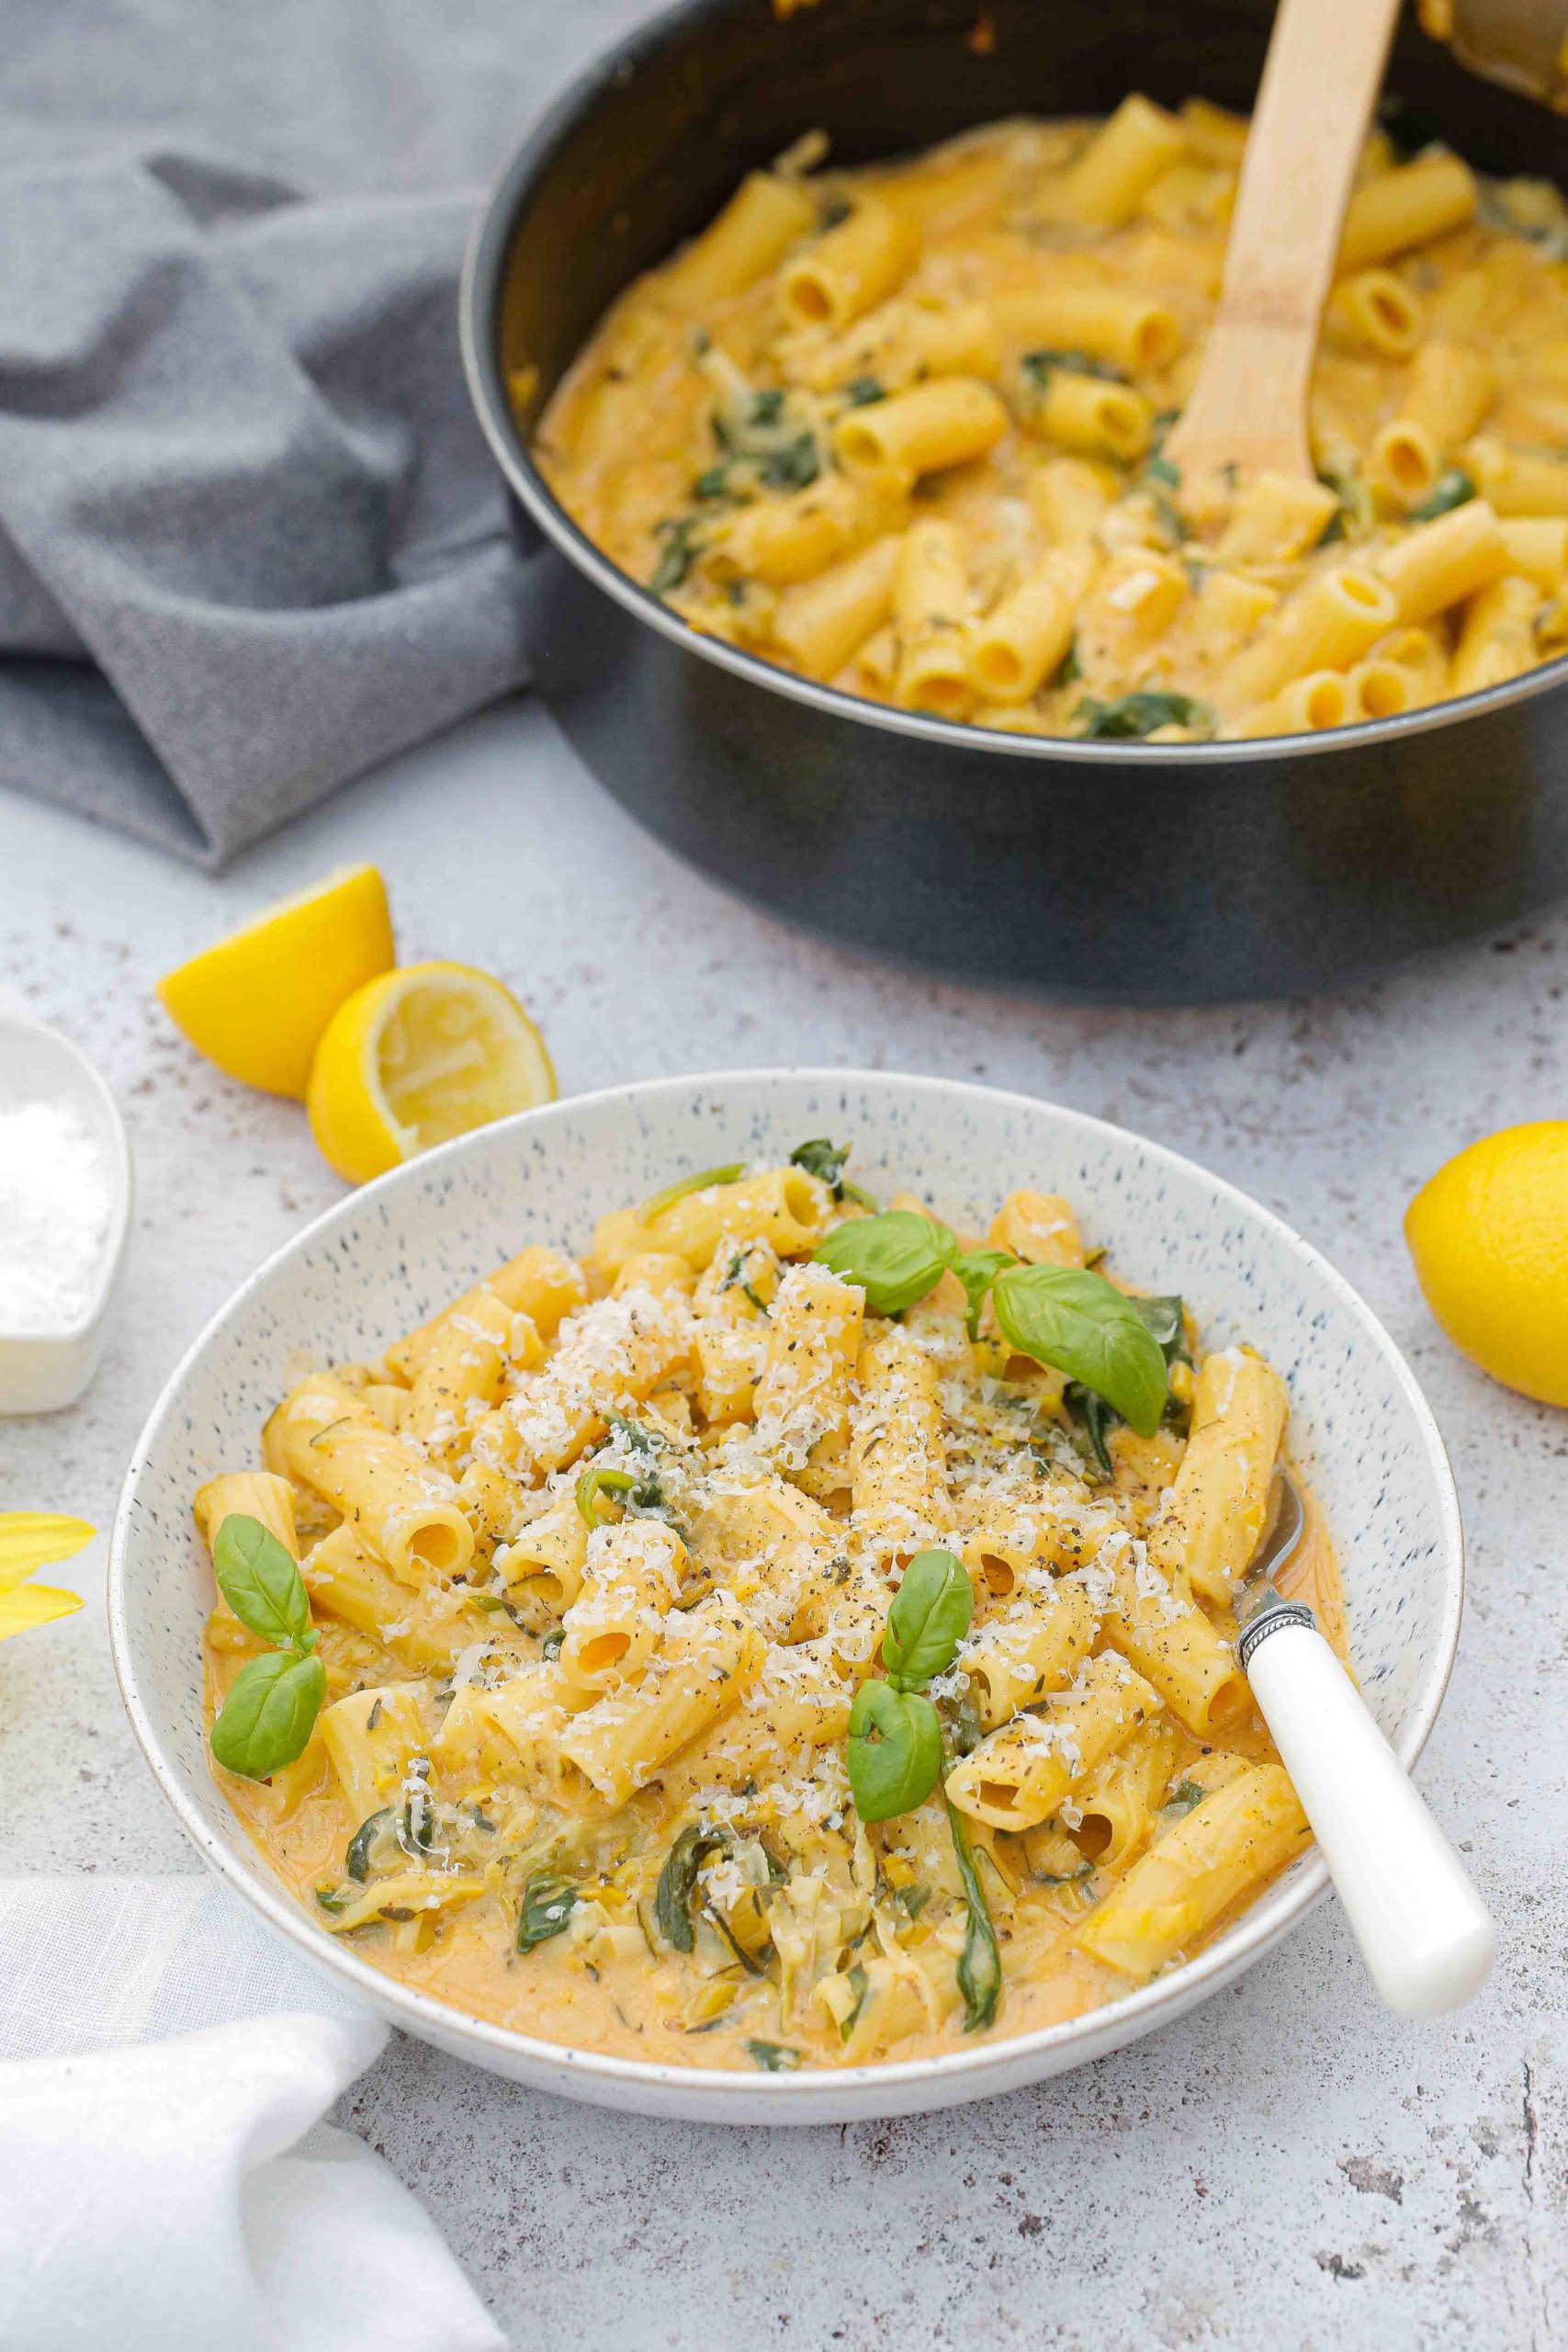 Creamy Lemon Courgette Rigatoni is a wonderful summery pasta. Lots of veggies all cooked in one pan in around 20 minutes for a speedy weeknight meal the whole family can enjoy! Recipe on thecookandhim.com | #summerpasta #pastasauce #veganpasta #courgettepasta #rigatoni #creamypastasauce #lemonpasta